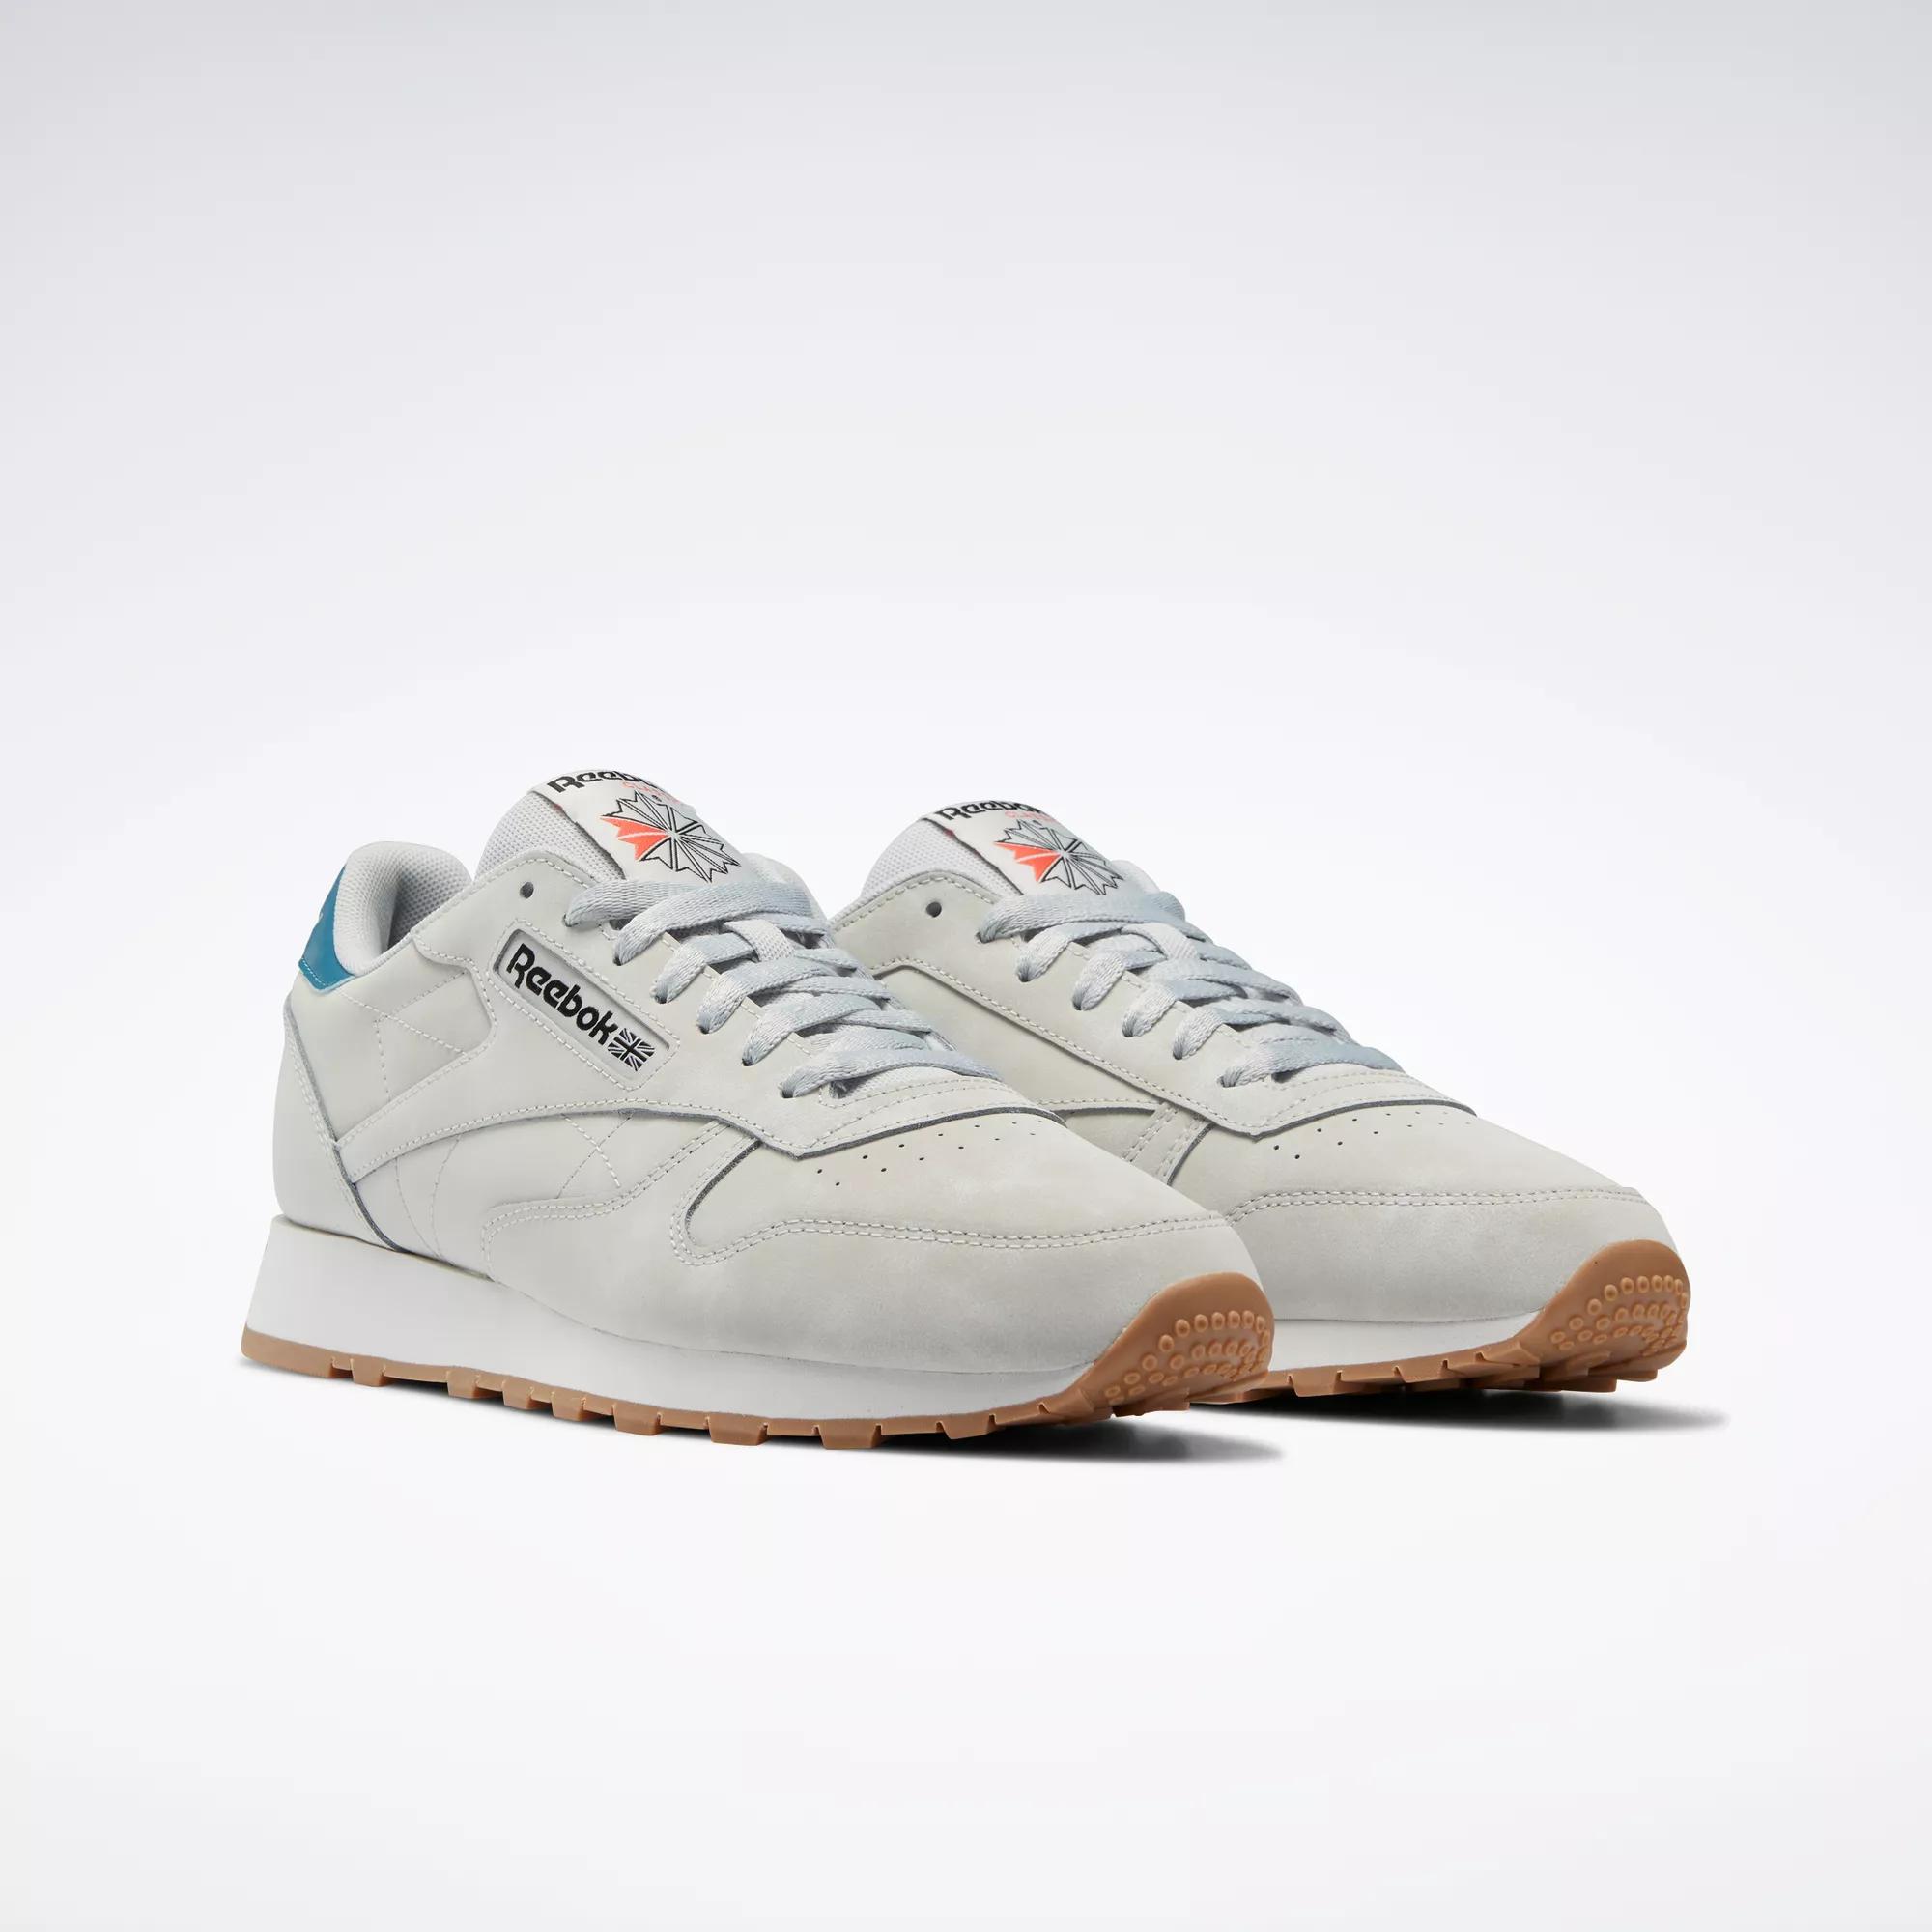 Forbedre Majroe Ulydighed Classic Leather Shoes - Pure Grey 2 / Pure Grey 1 / Steely Blue S23-R |  Reebok